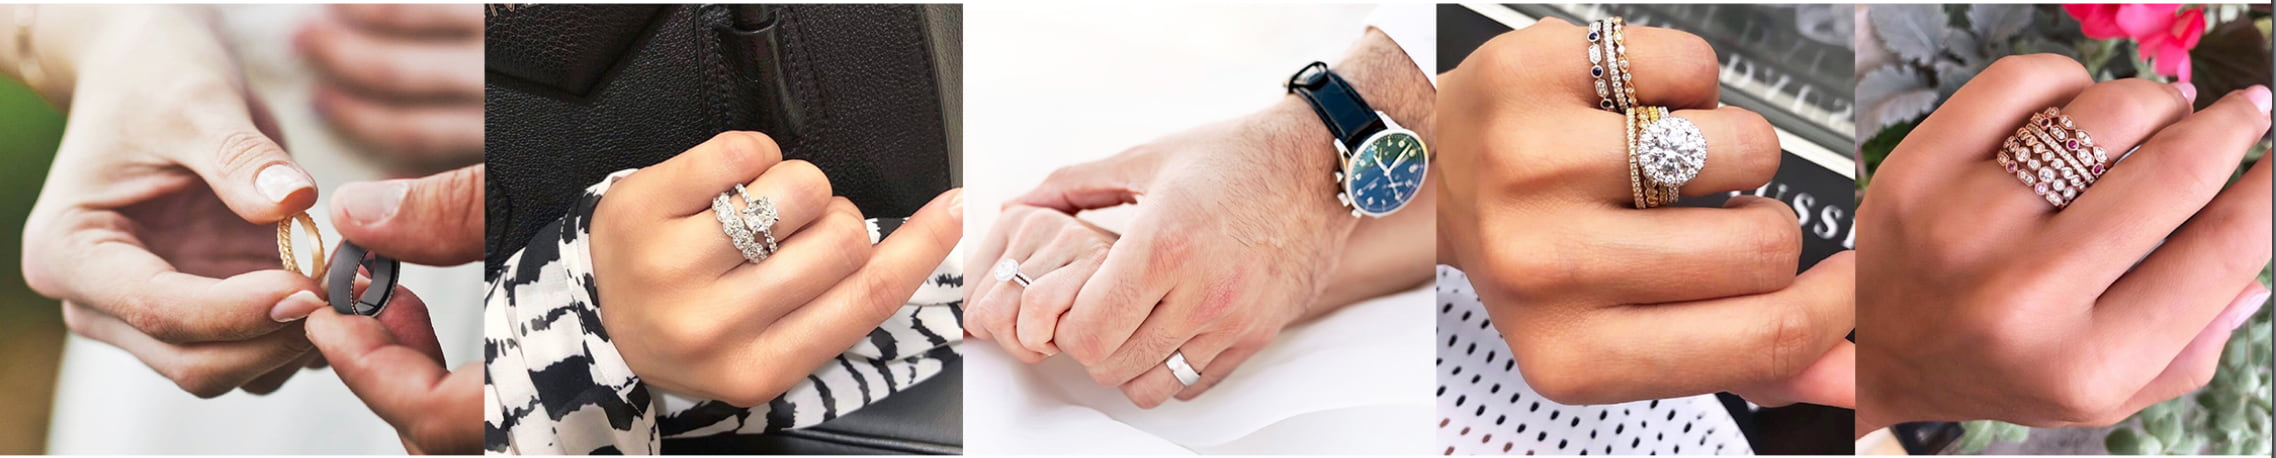 Couple Exchanging Wedding Bands and Model Wearing Diamond Rings